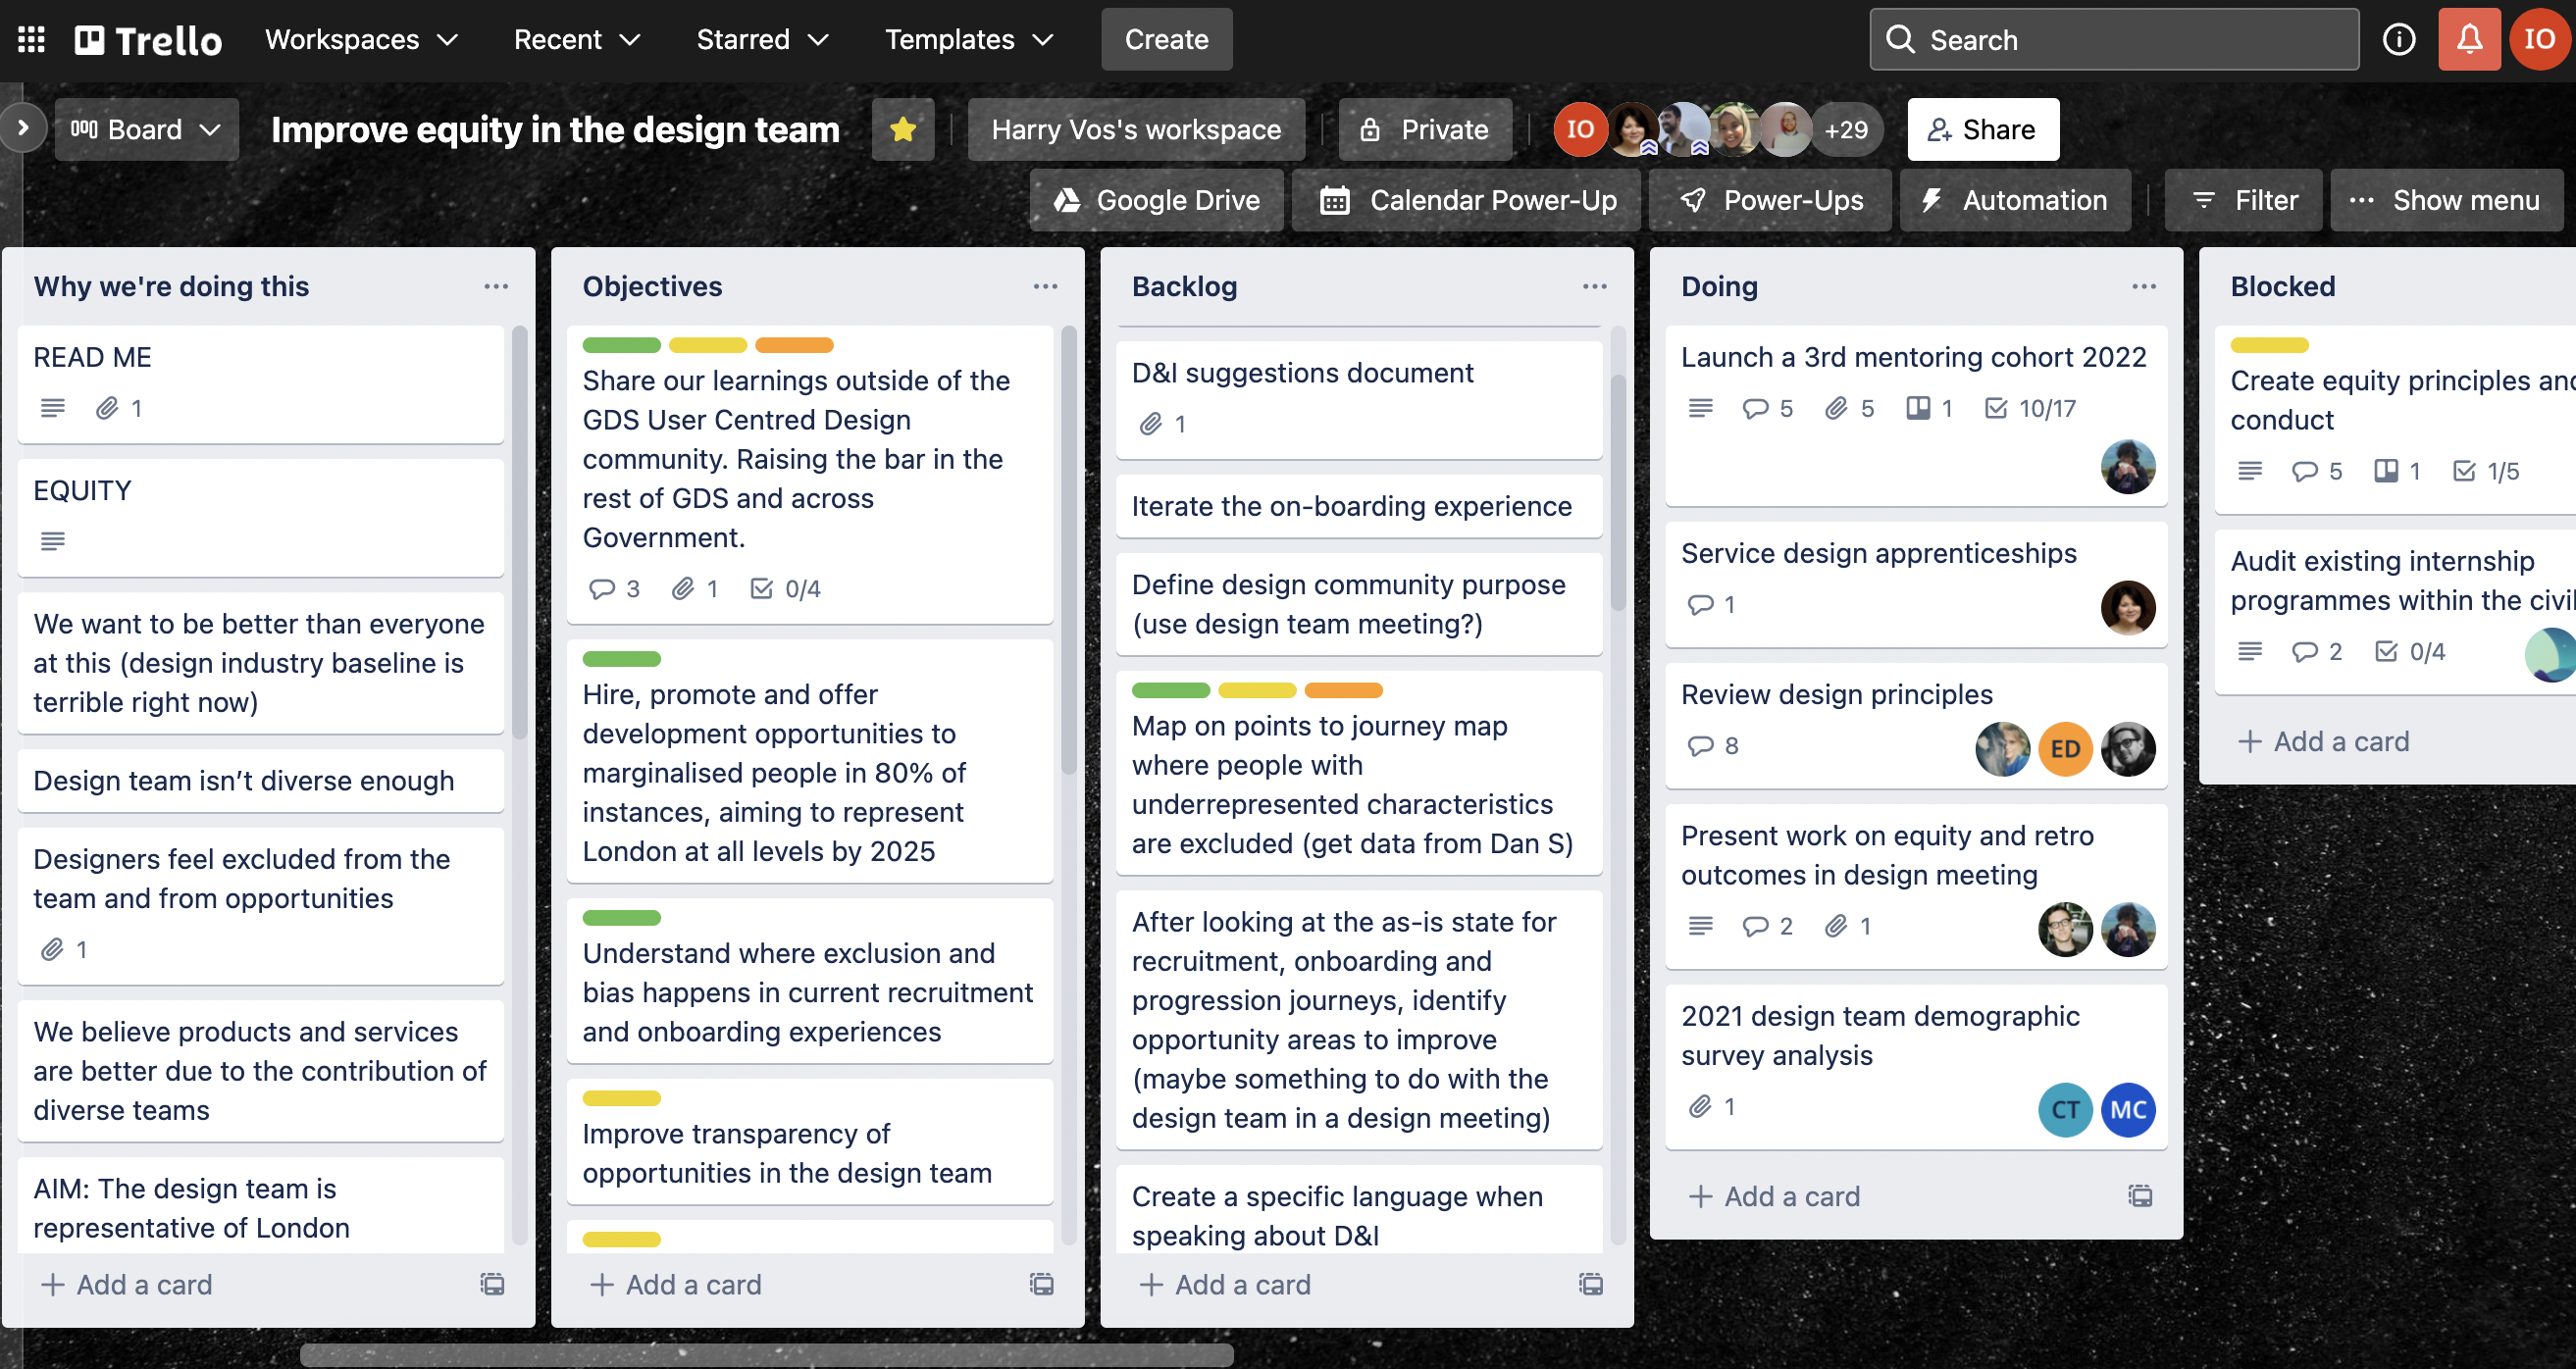 Screenshot of the improve equity in the design team working group trello board. There are 4 columns. They are 'why are we doing this', 'objectives', 'backlog', 'doing', and 'blocked'. Under each column there are cards that describe the work that is being done.